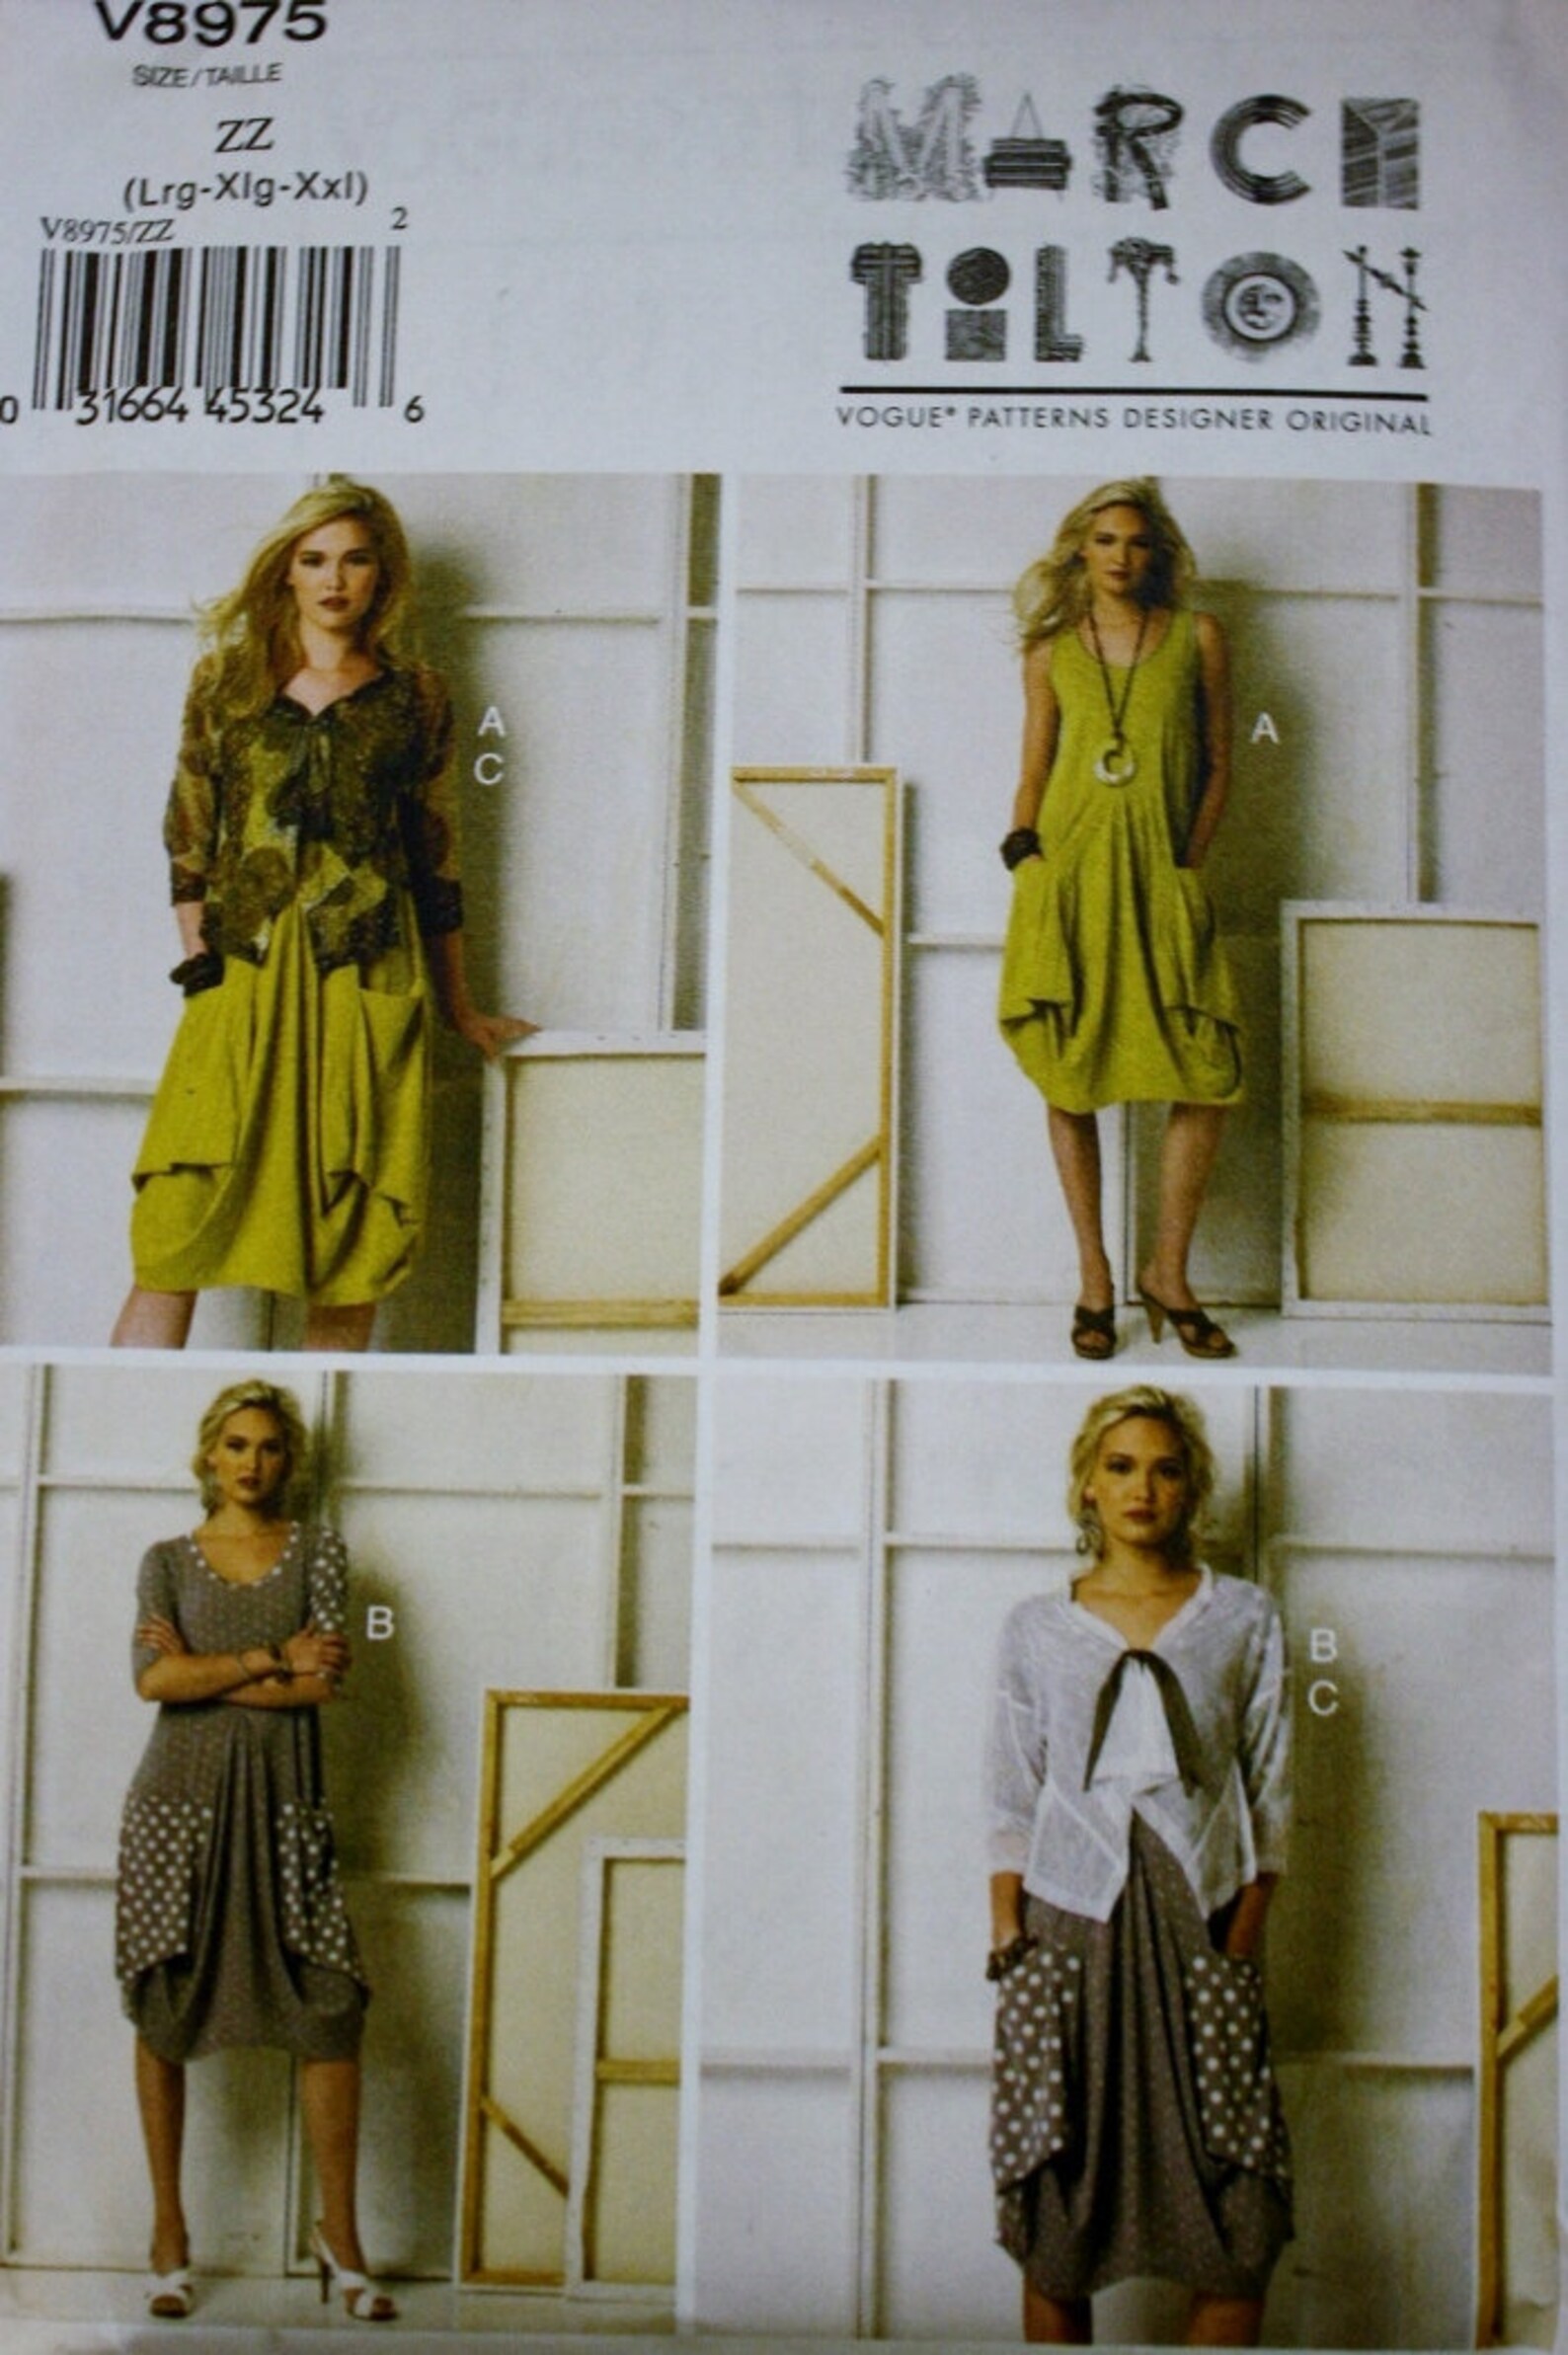 Womens Knit Dress and Jacket Vogue Sewing Pattern V8975 - Etsy